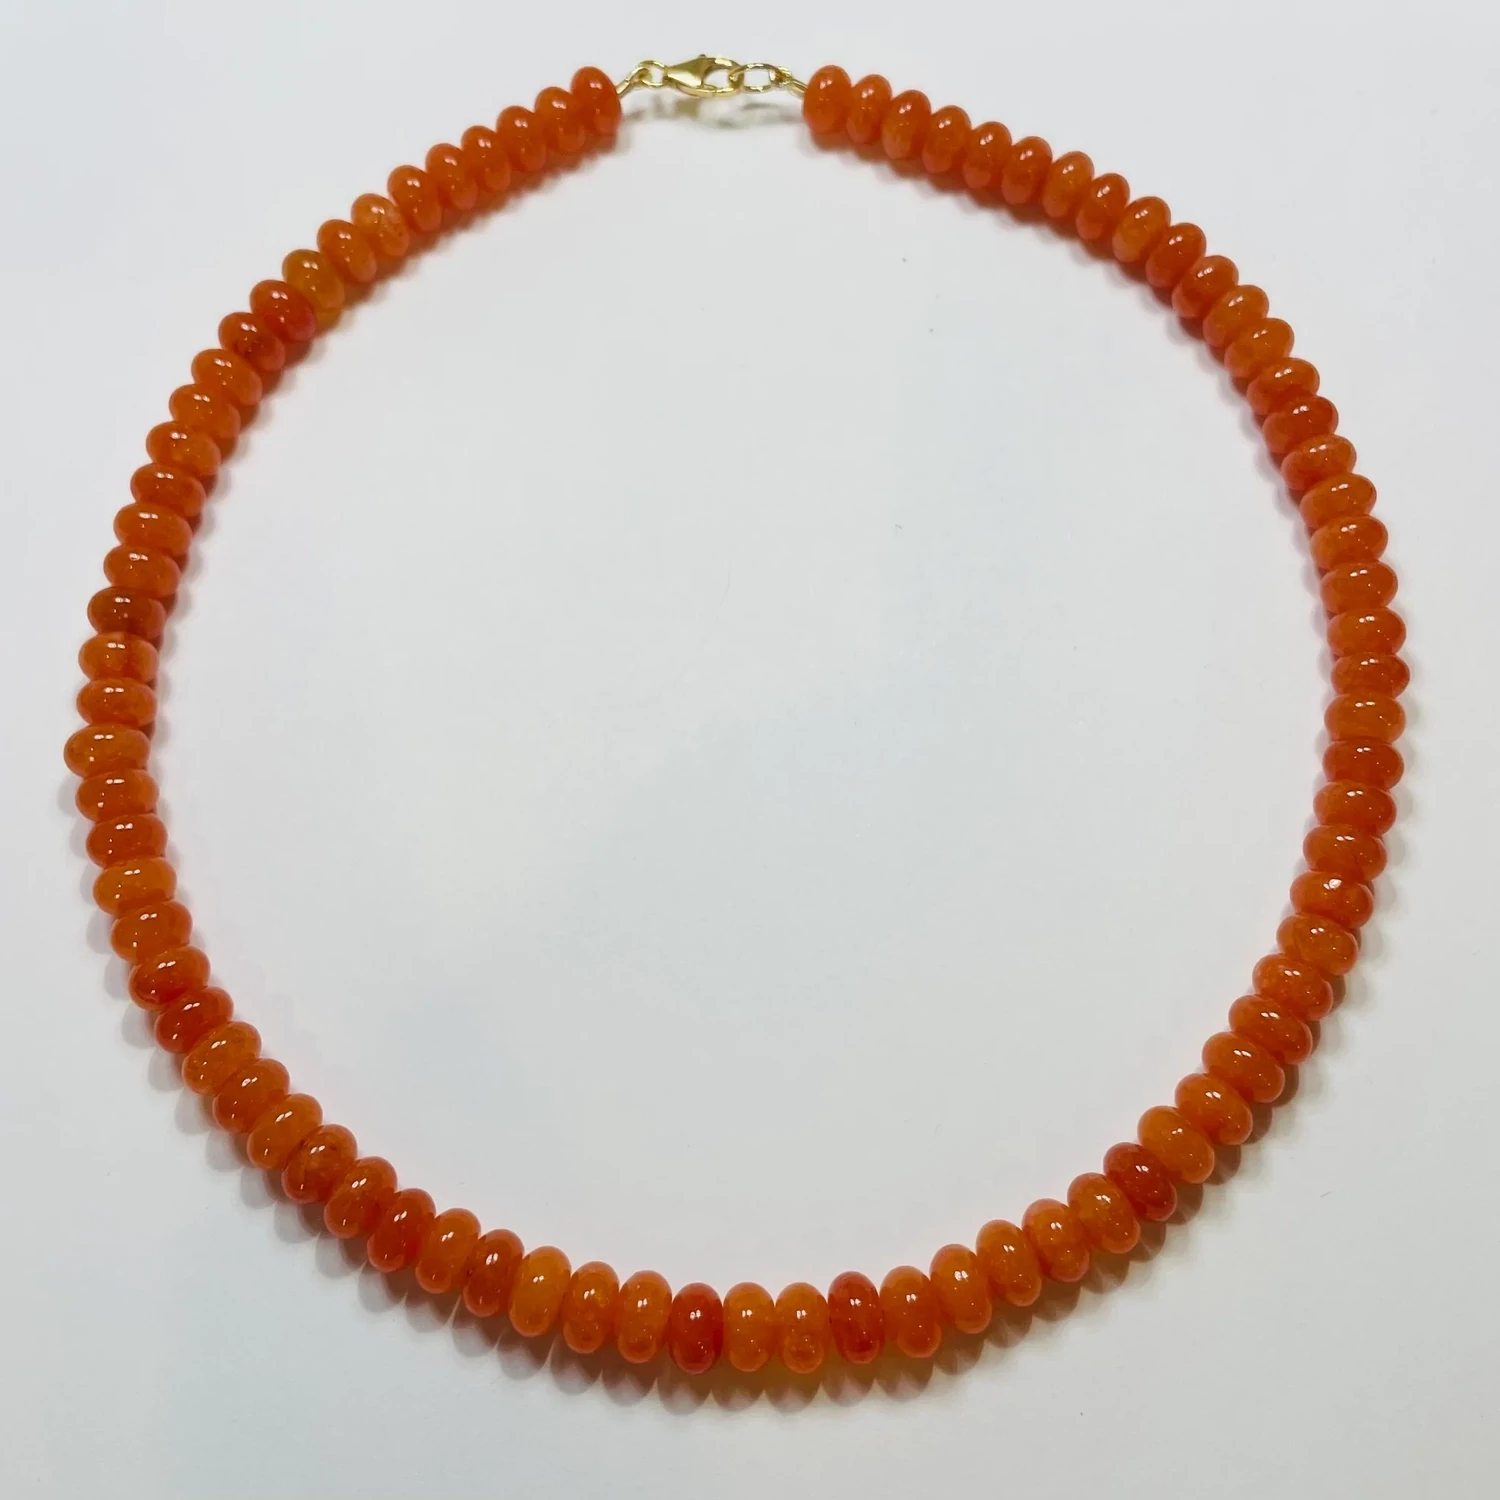 Theodosia Clementine Candy Necklaces